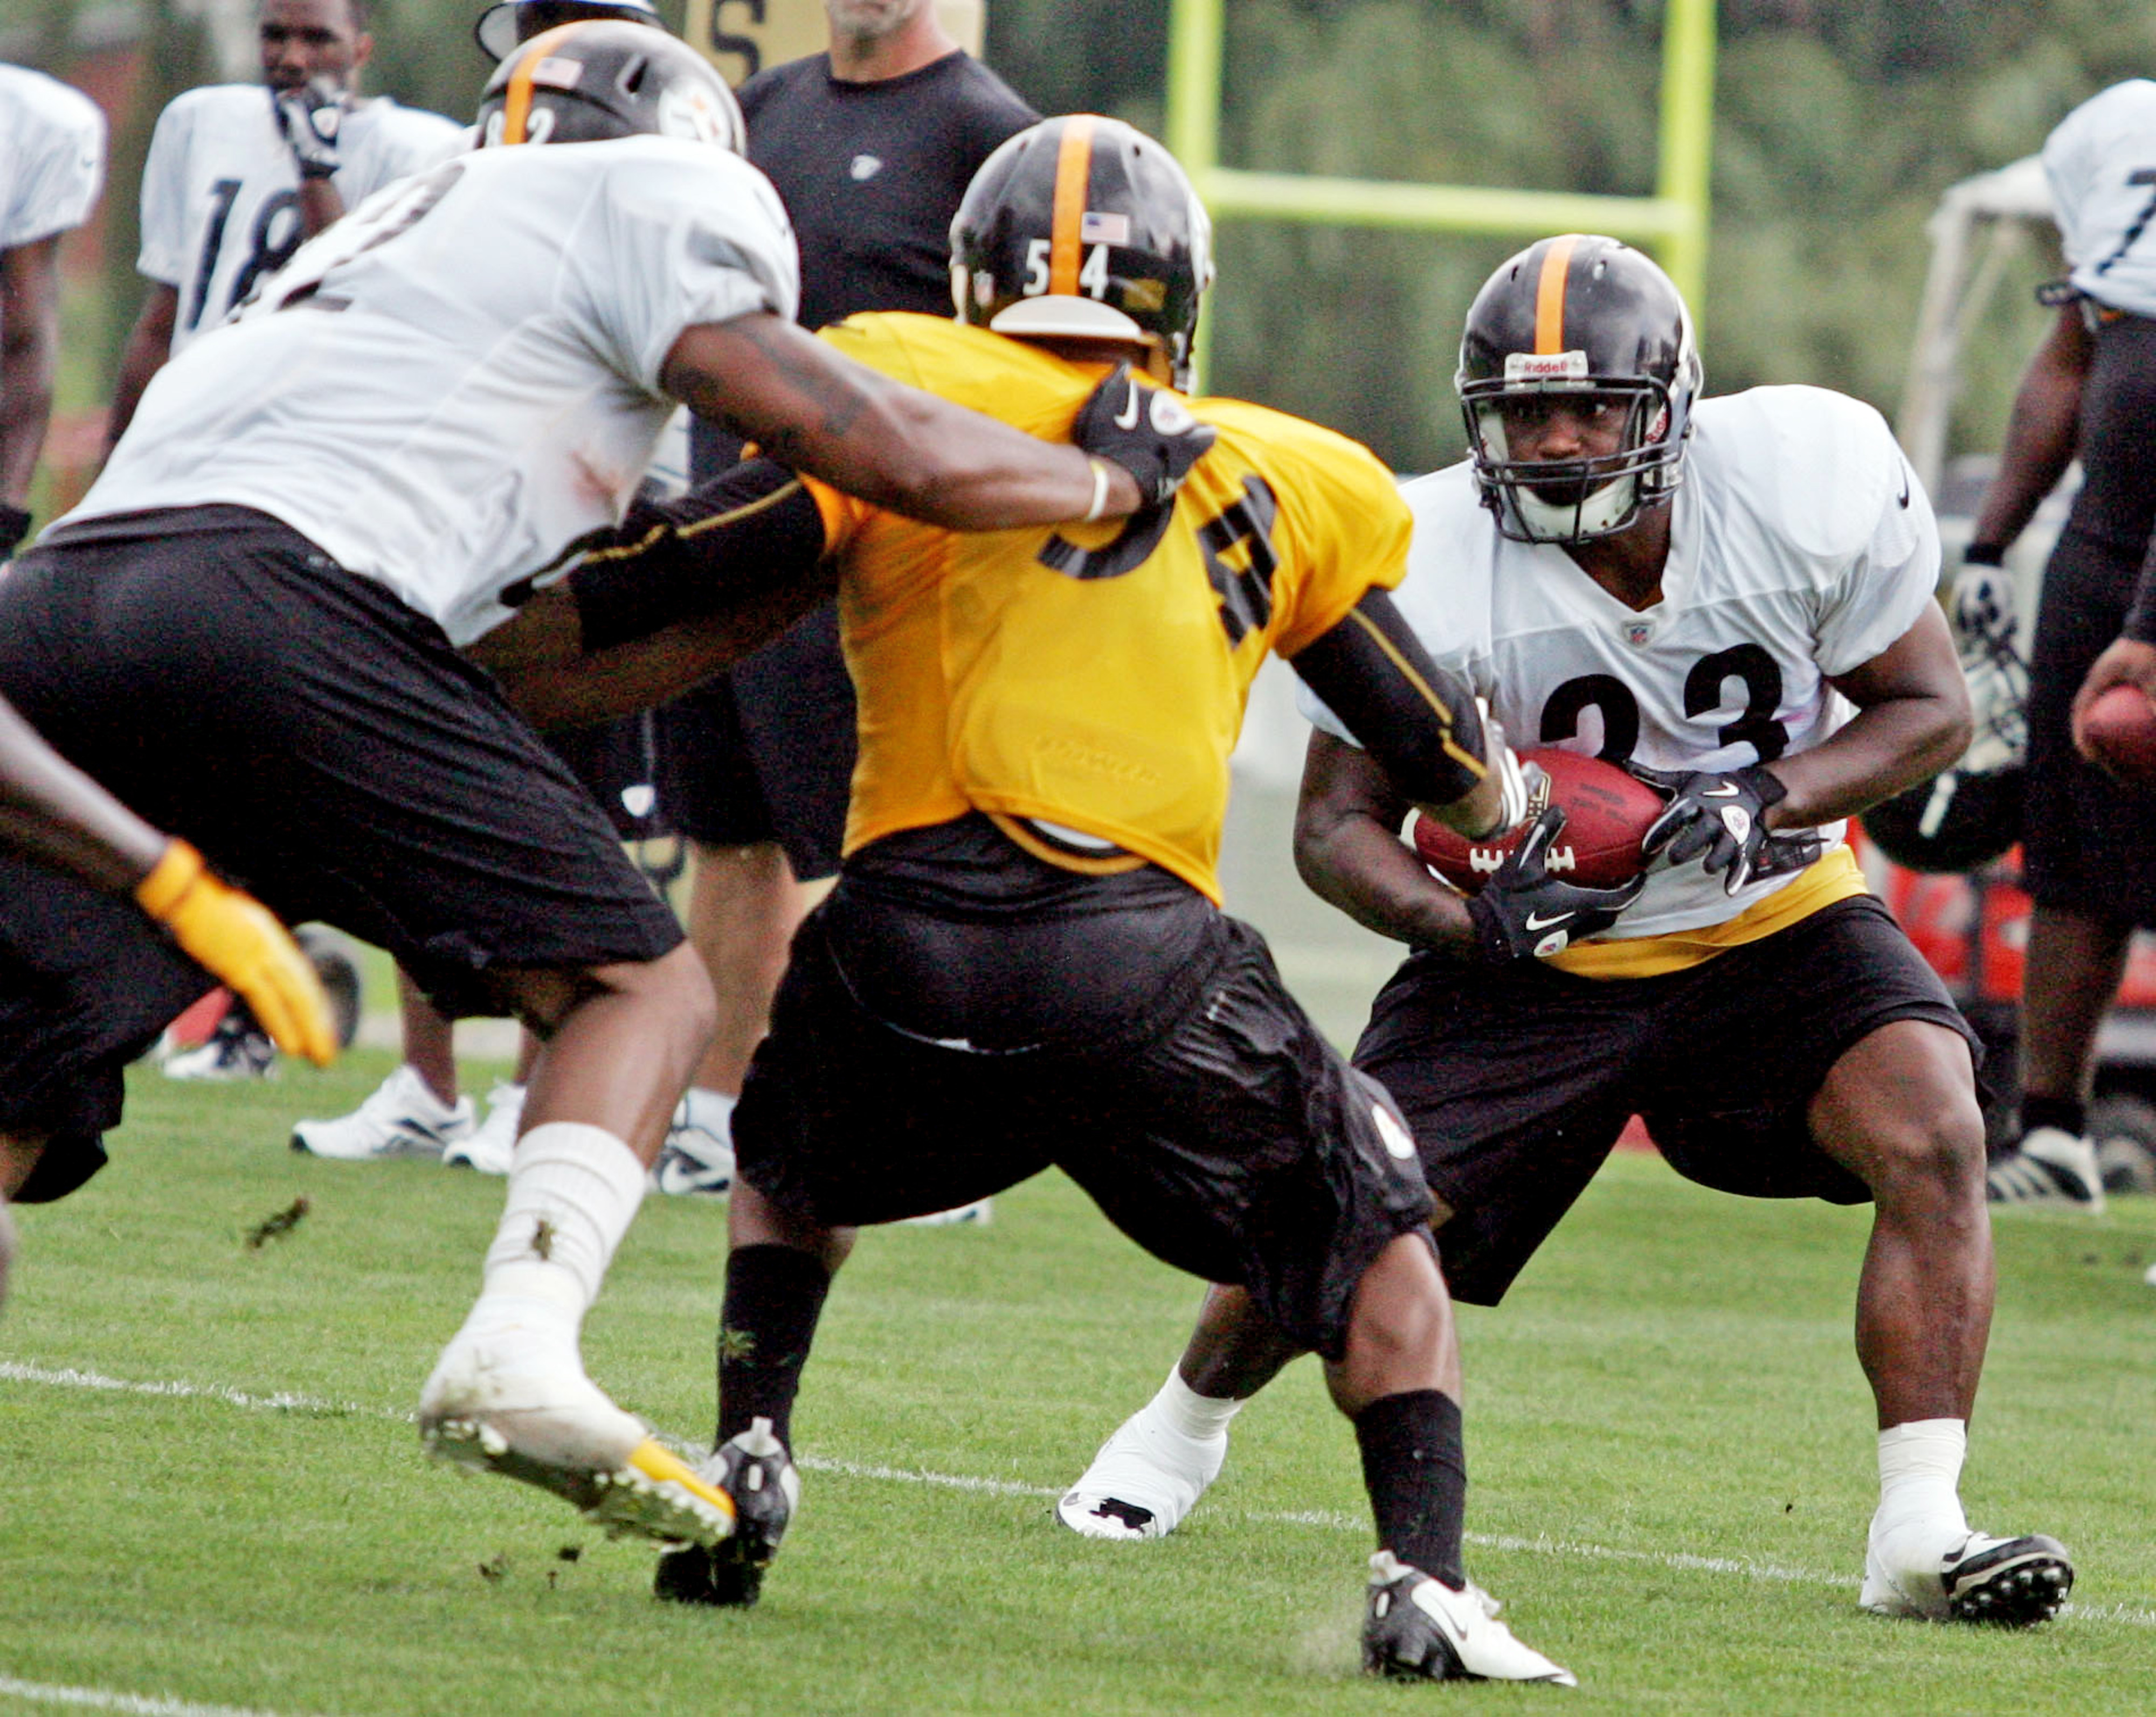 July 28, 2012; Pittsburgh, PA, USA; Pittsburgh Steelers running back Isaac Redman (33) carries the ball during training camp at Saint Vincent College. Mandatory Credit: Charles LeClaire-US PRESSWIRE